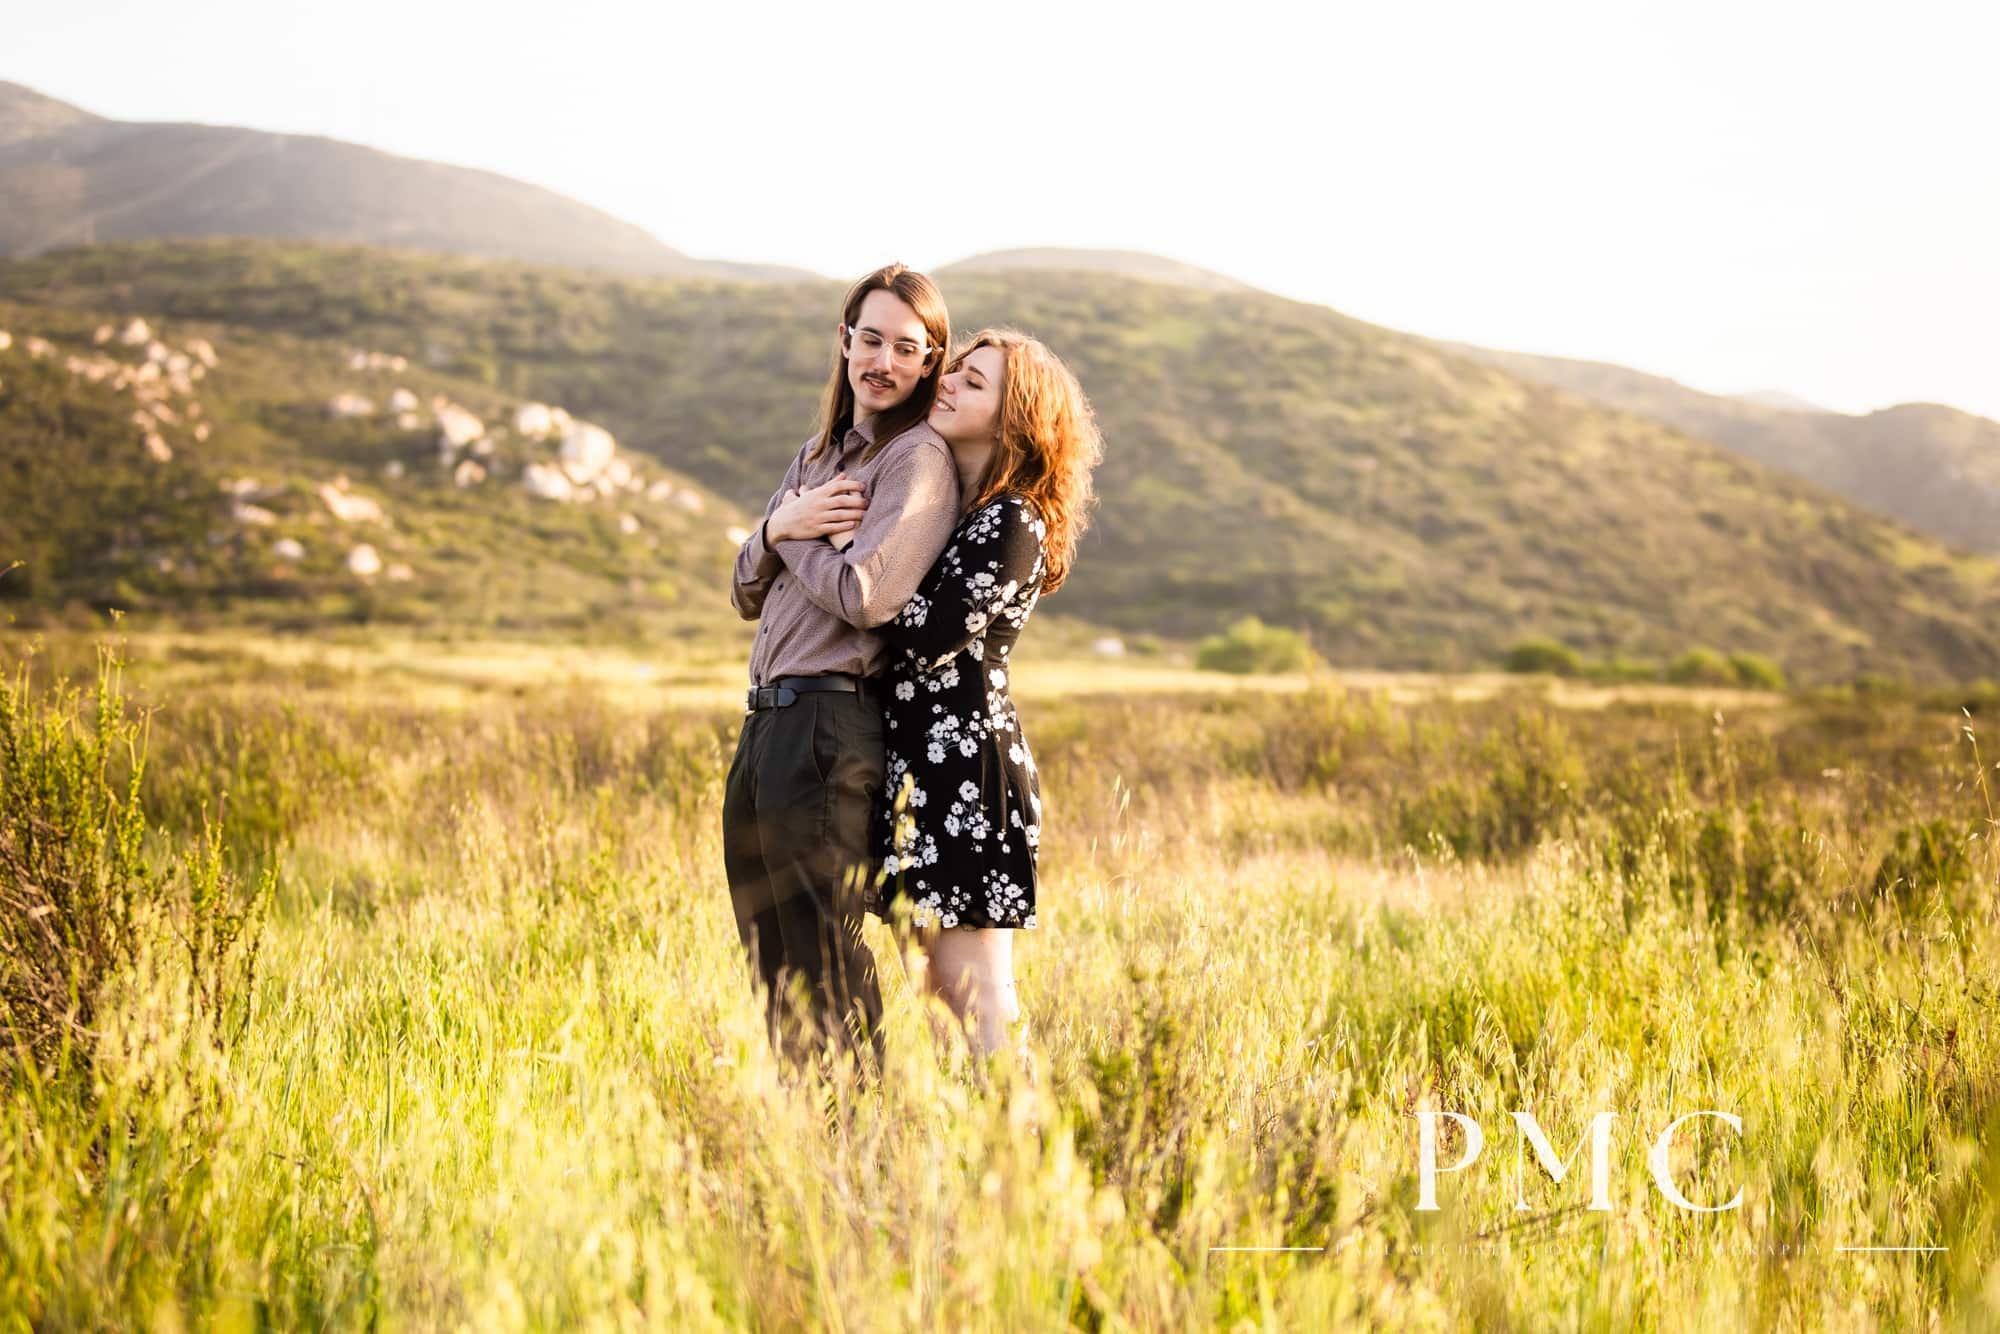 Sweetwater Bridge and Trails Engagement Session - Best San Diego Wedding Photographer-14.jpg